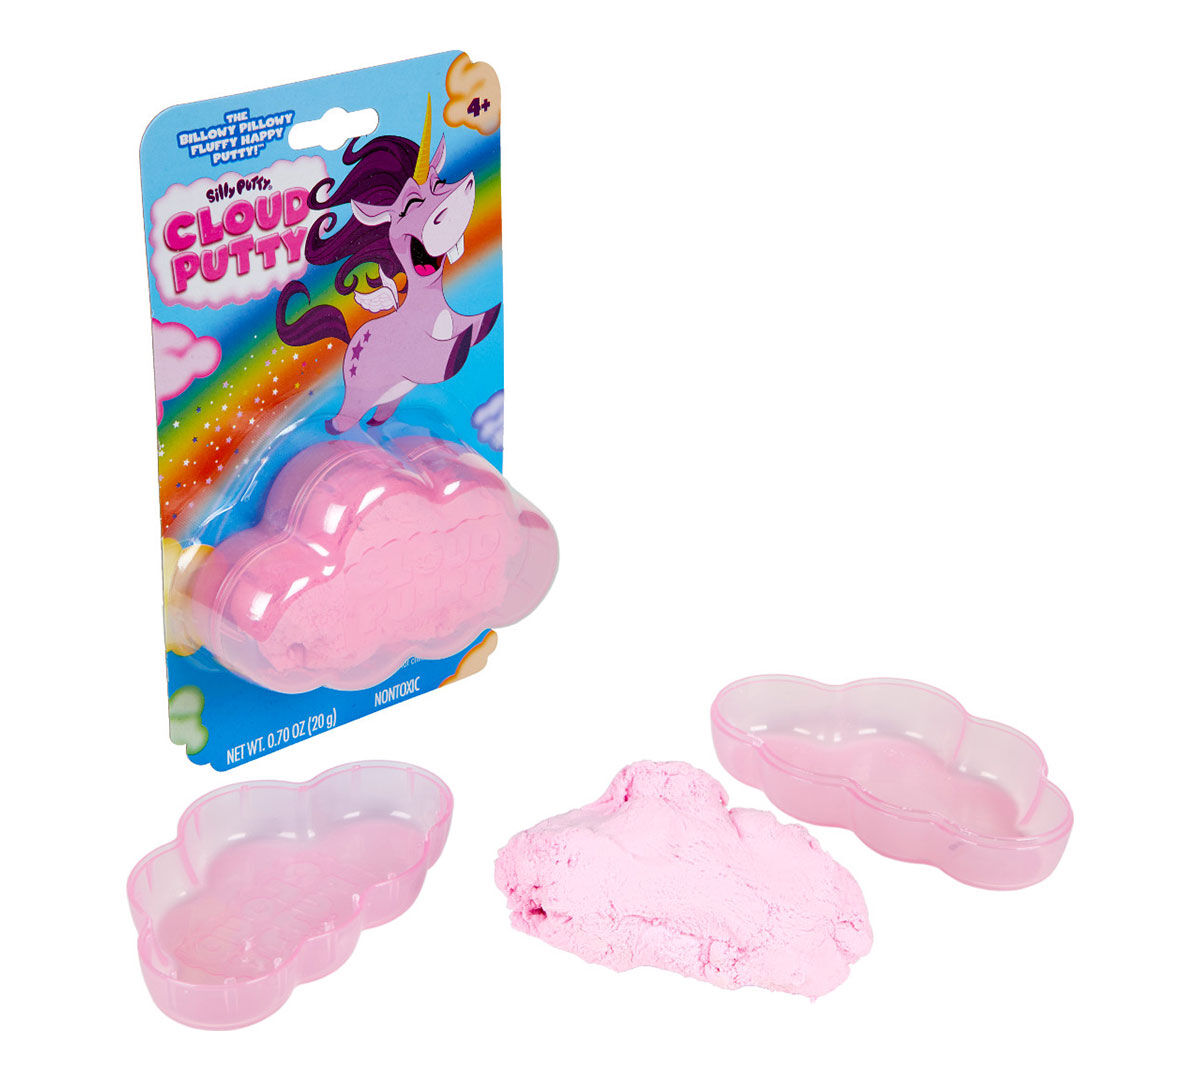 Silly Putty Cloud Putty, Mystery Toy, 1 Count, Crayola.com